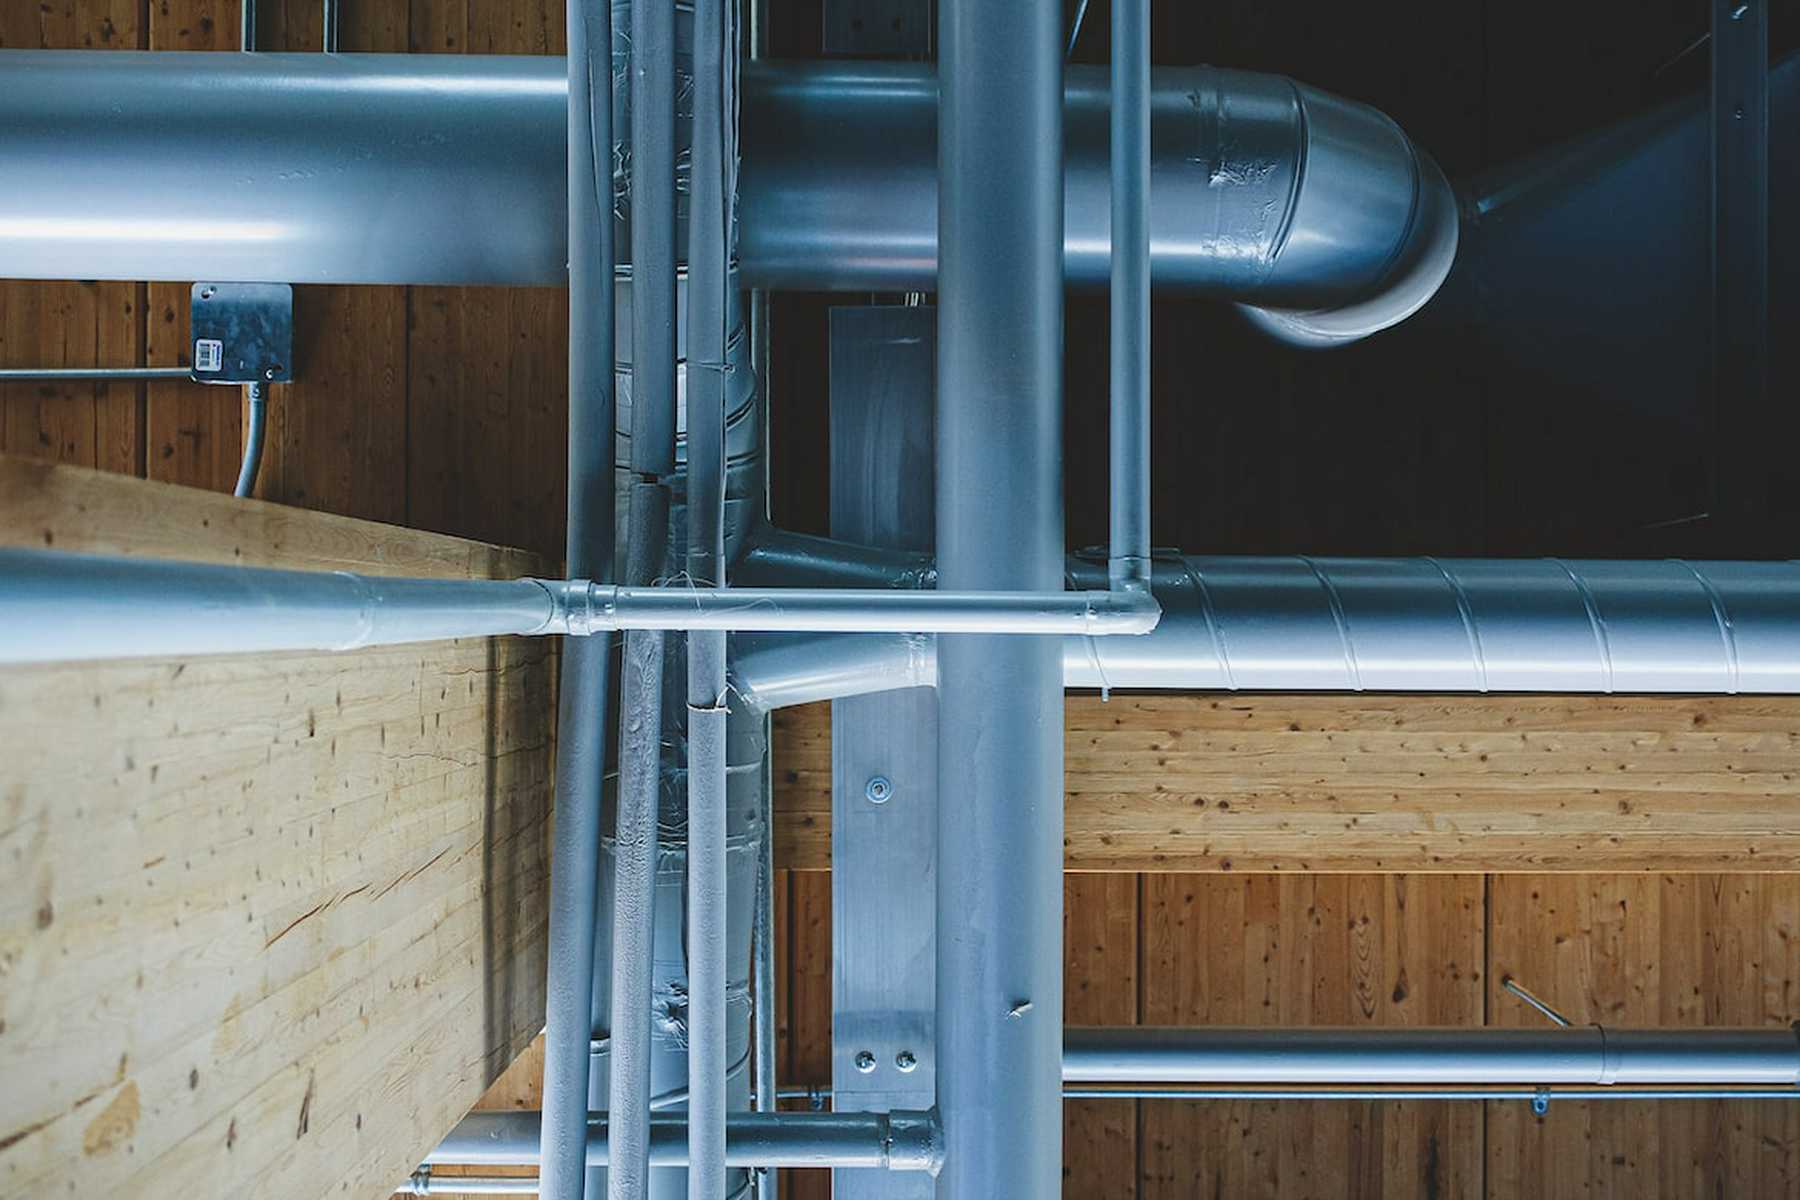 An arrangement of various pipes, illustrating the complexity of a home's plumbing system and potential issues that may arise, such as burst pipes